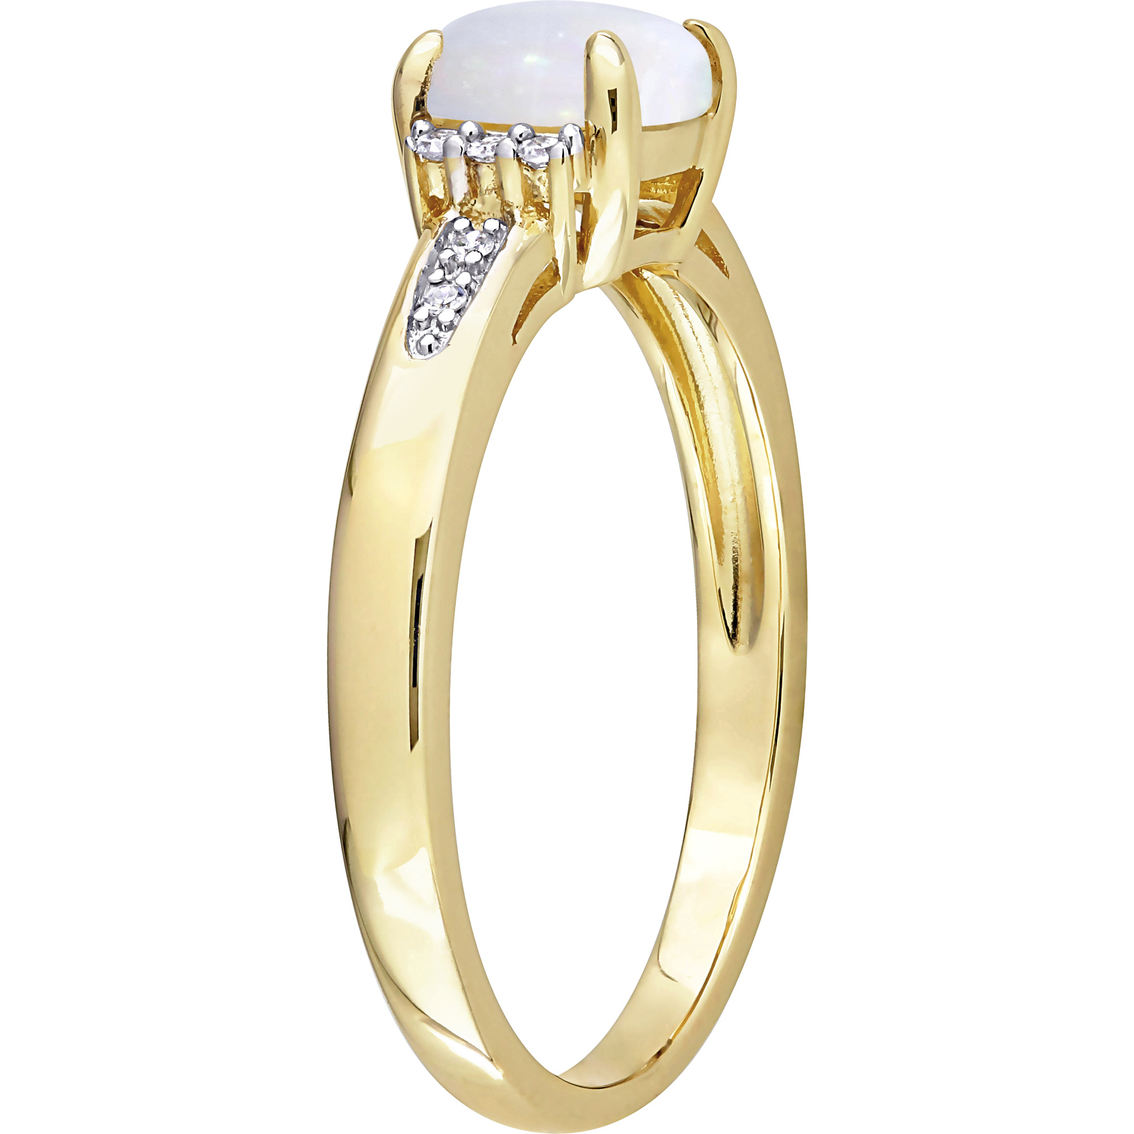 Sofia B. 10K Yellow Gold 1/2 CTW Opal and Diamond Accent Ring - Image 3 of 4